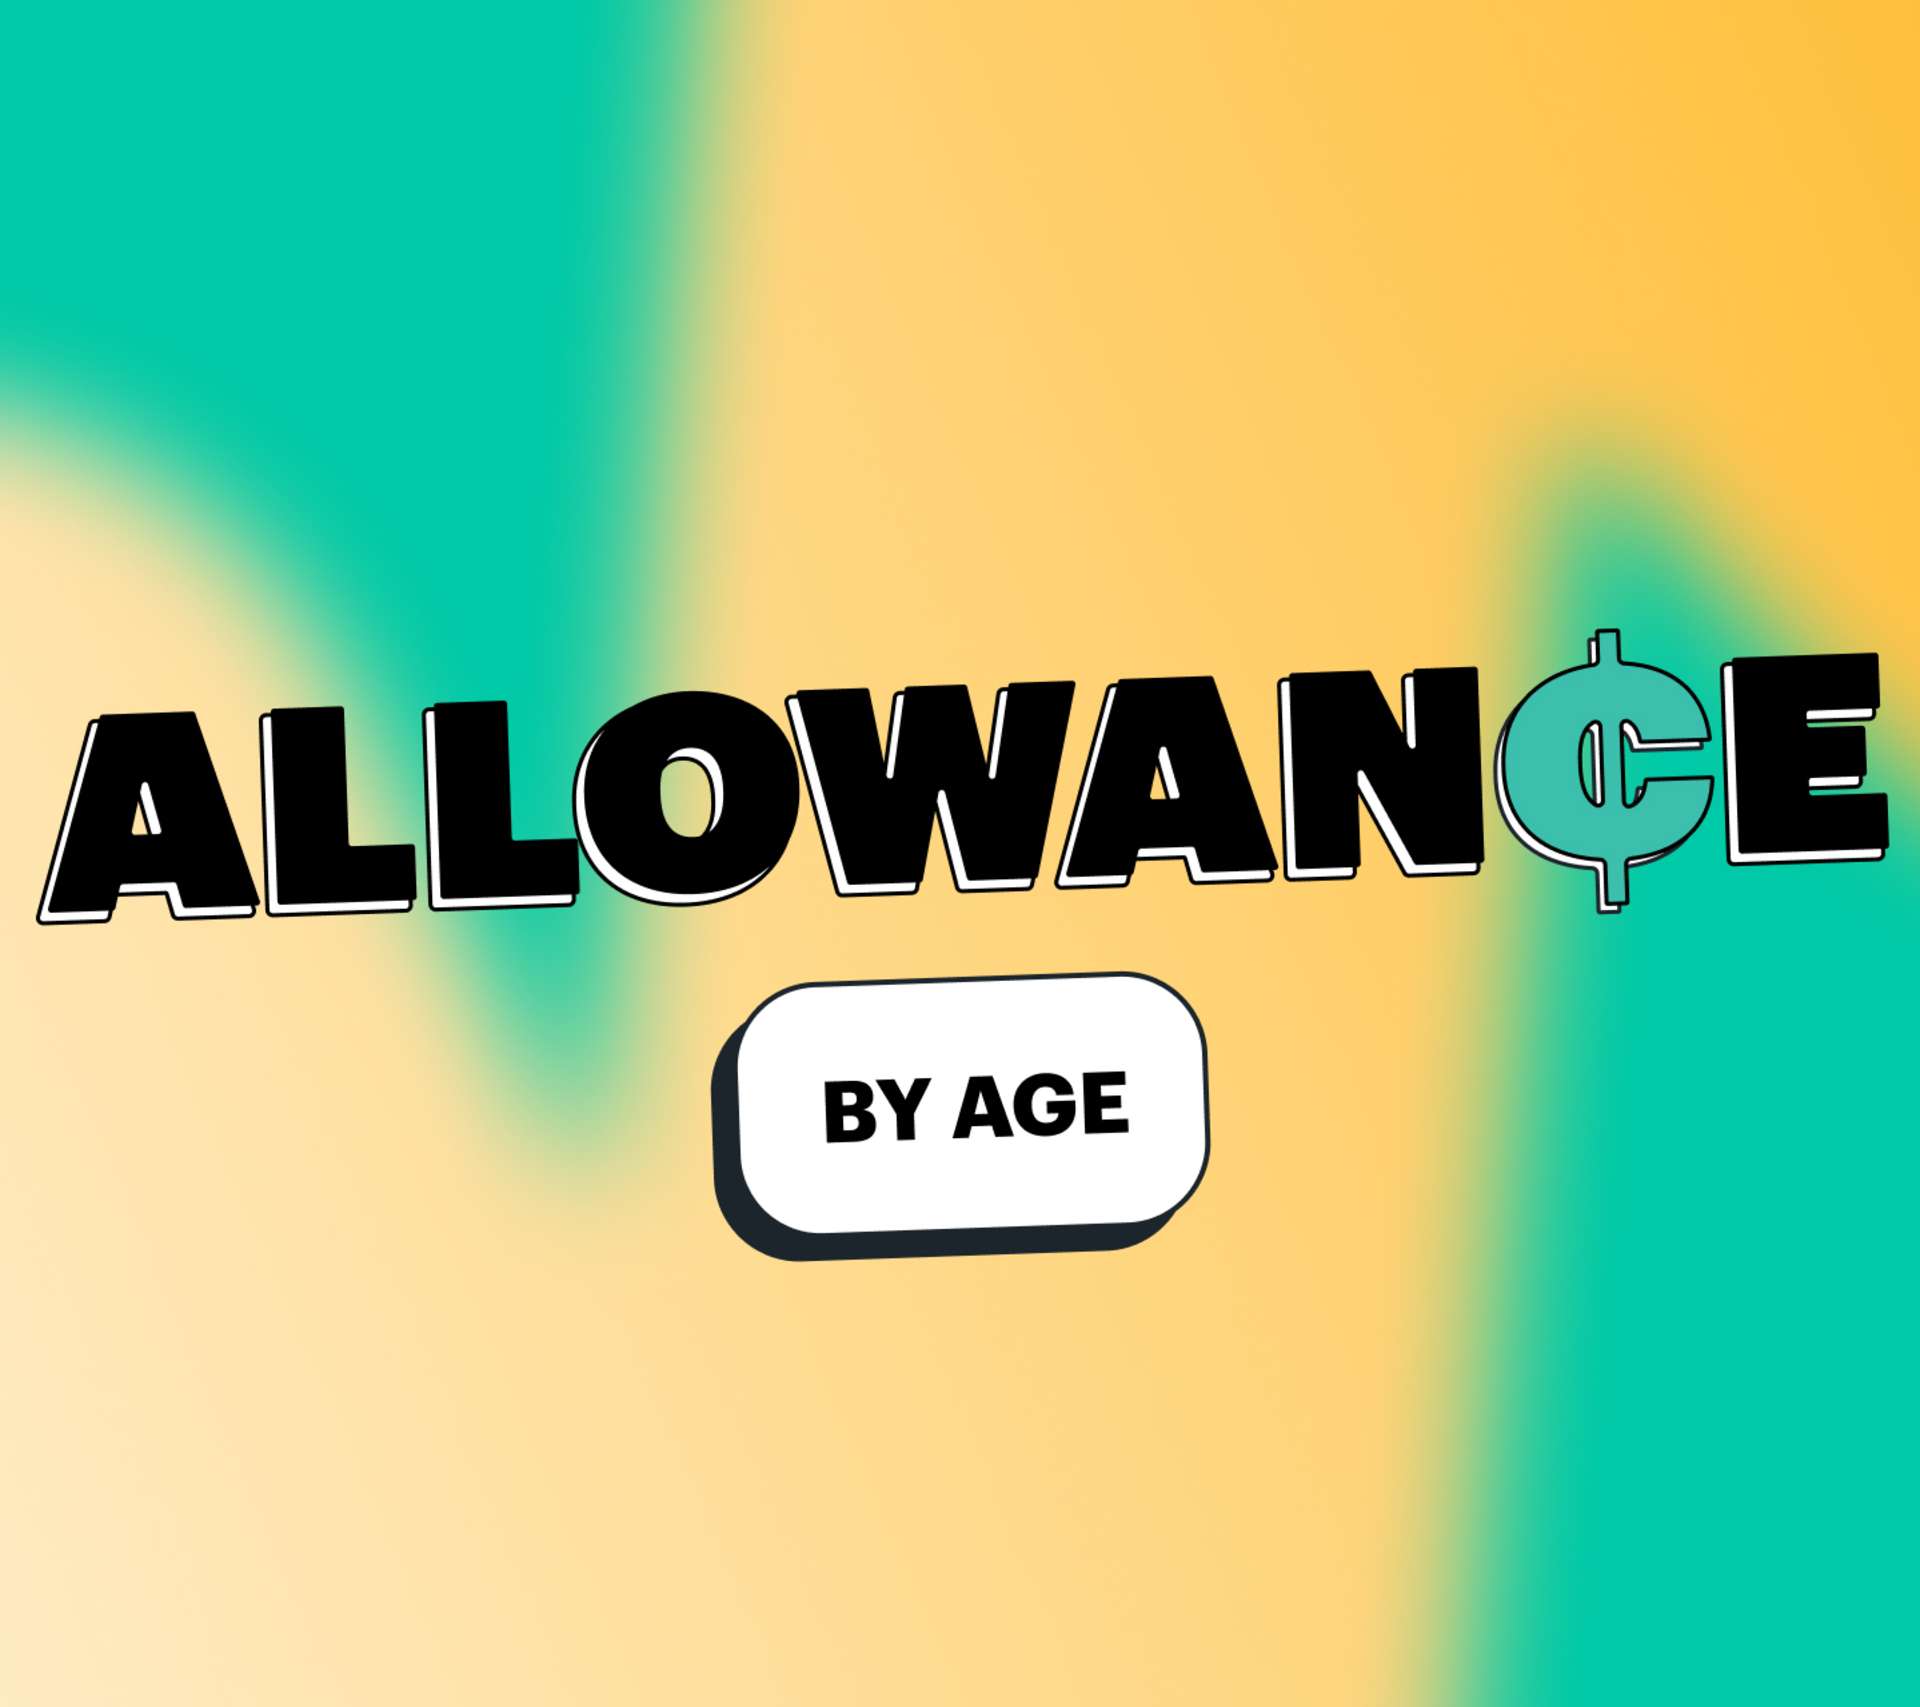 Allowance by age against yellow and green background for Greenlight's allowance by age blog in 2022